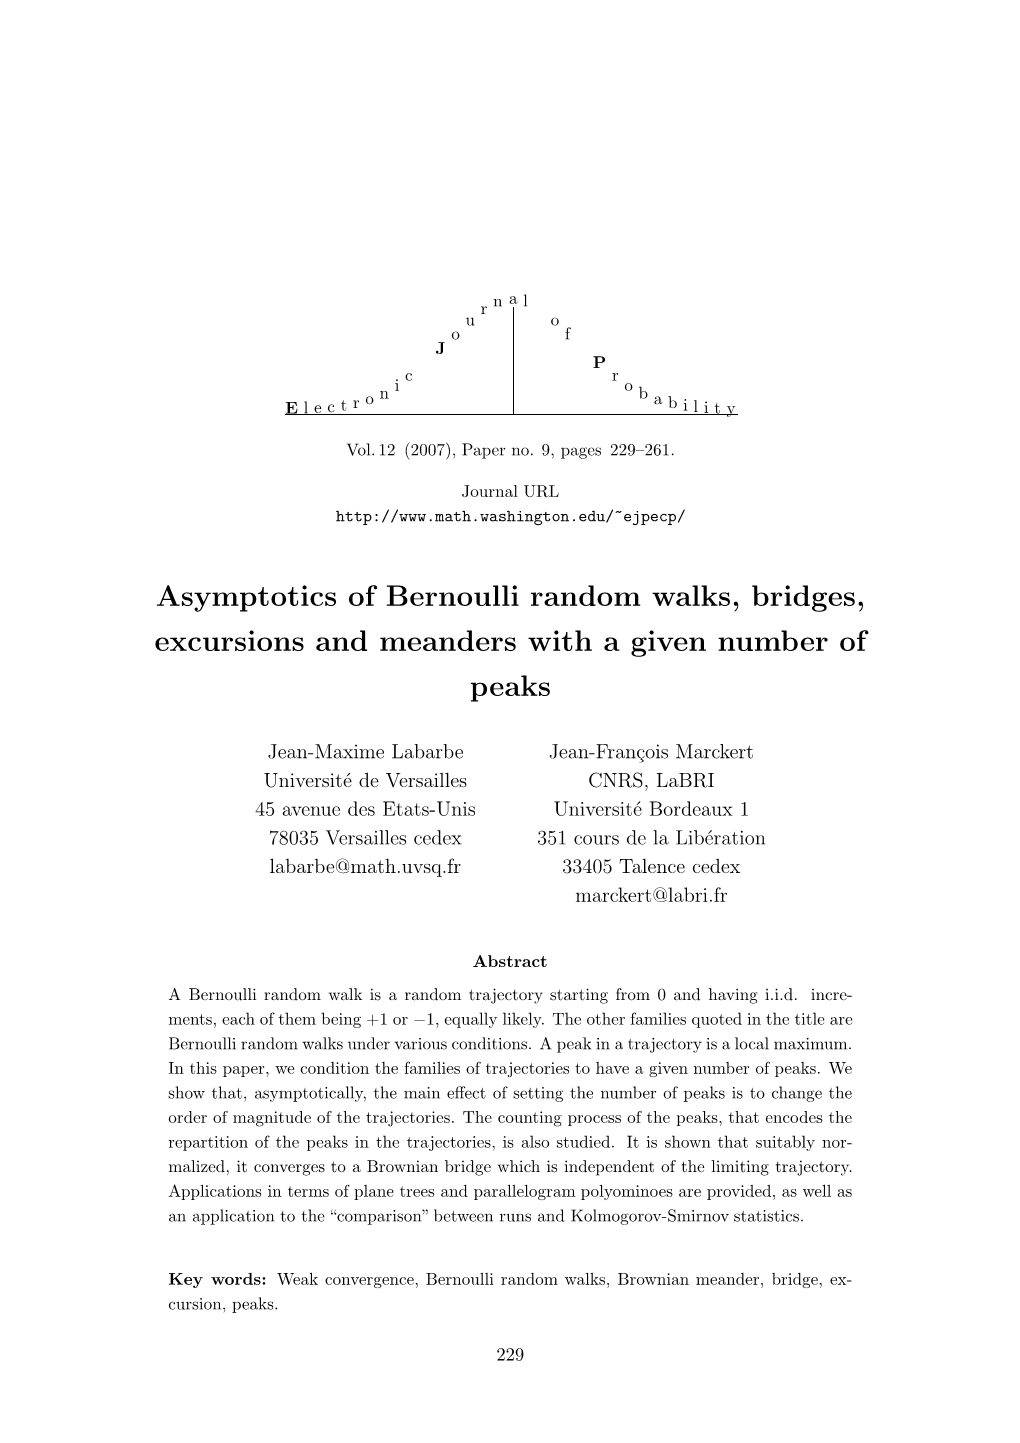 Asymptotics of Bernoulli Random Walks, Bridges, Excursions and Meanders with a Given Number of Peaks